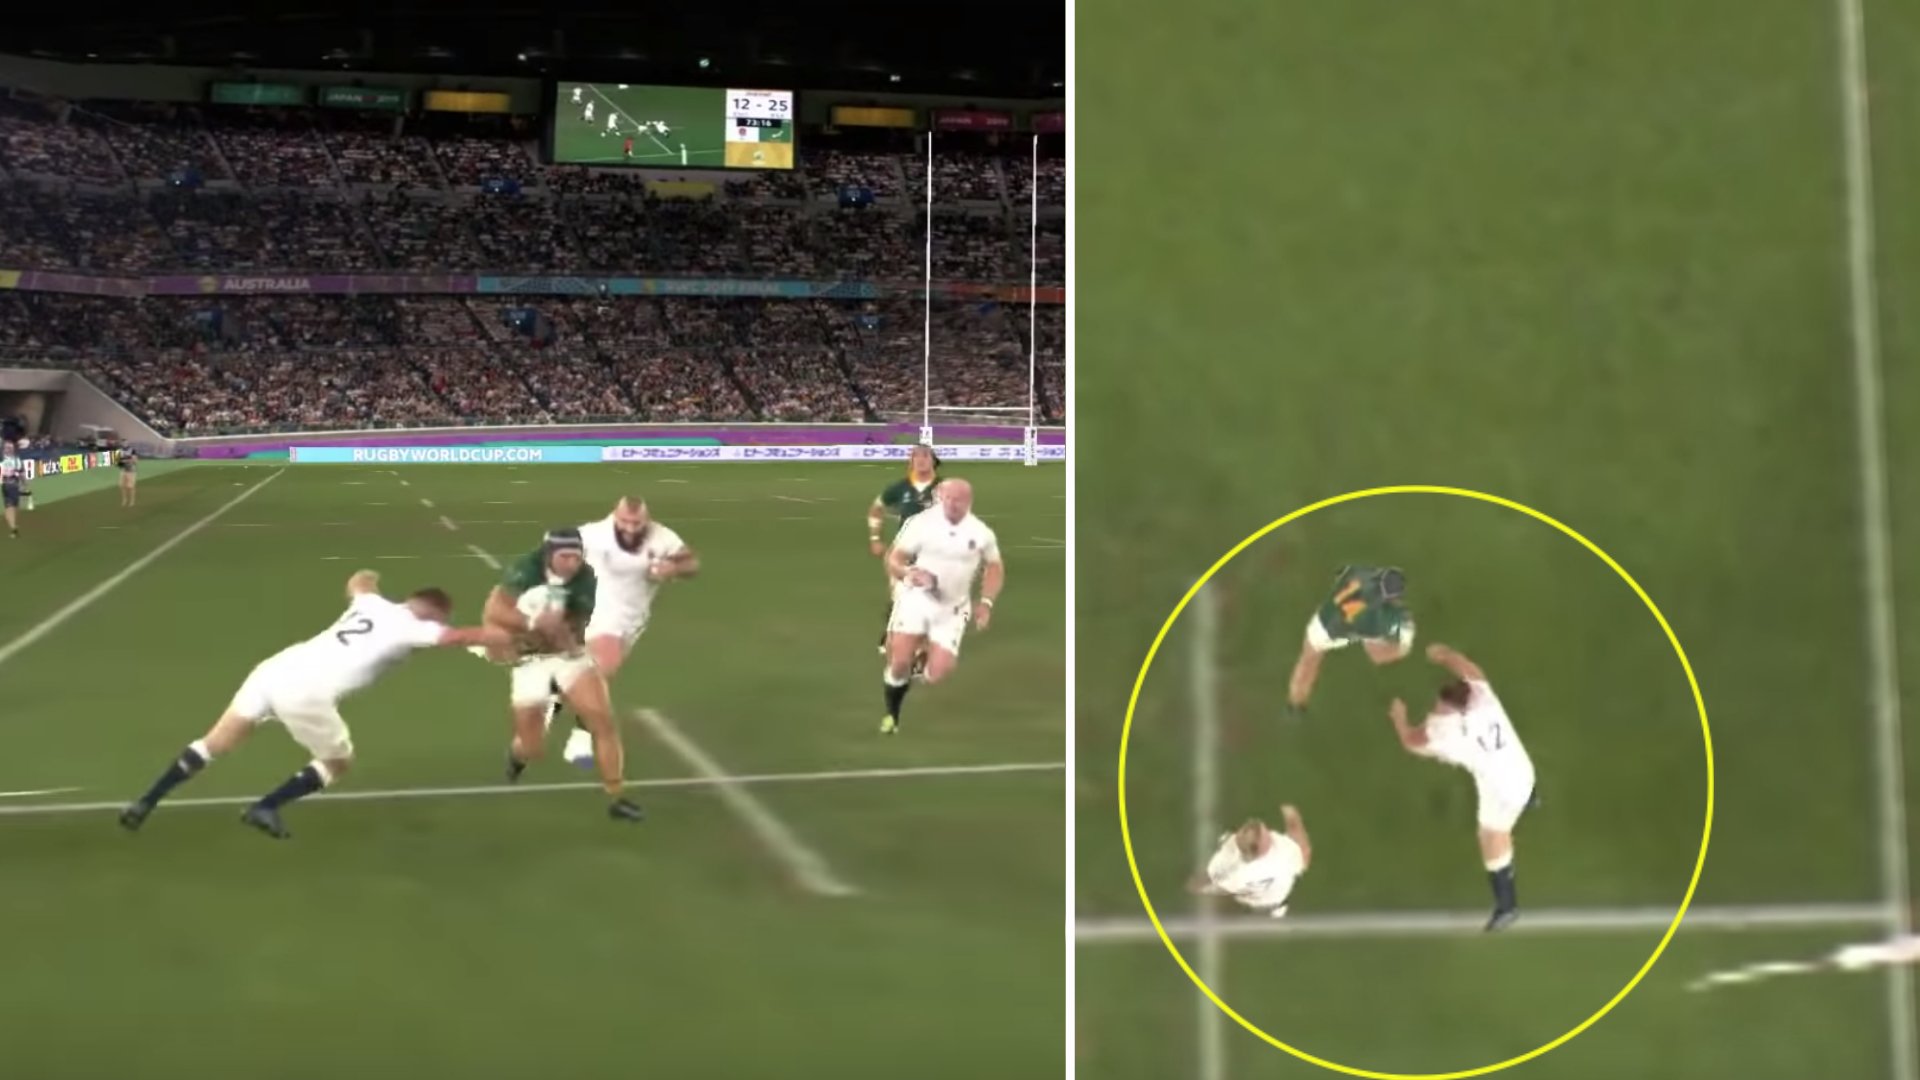 World Rugby go full savage on Owen Farrell by releasing ANOTHER brutal angle of that Kolbe try